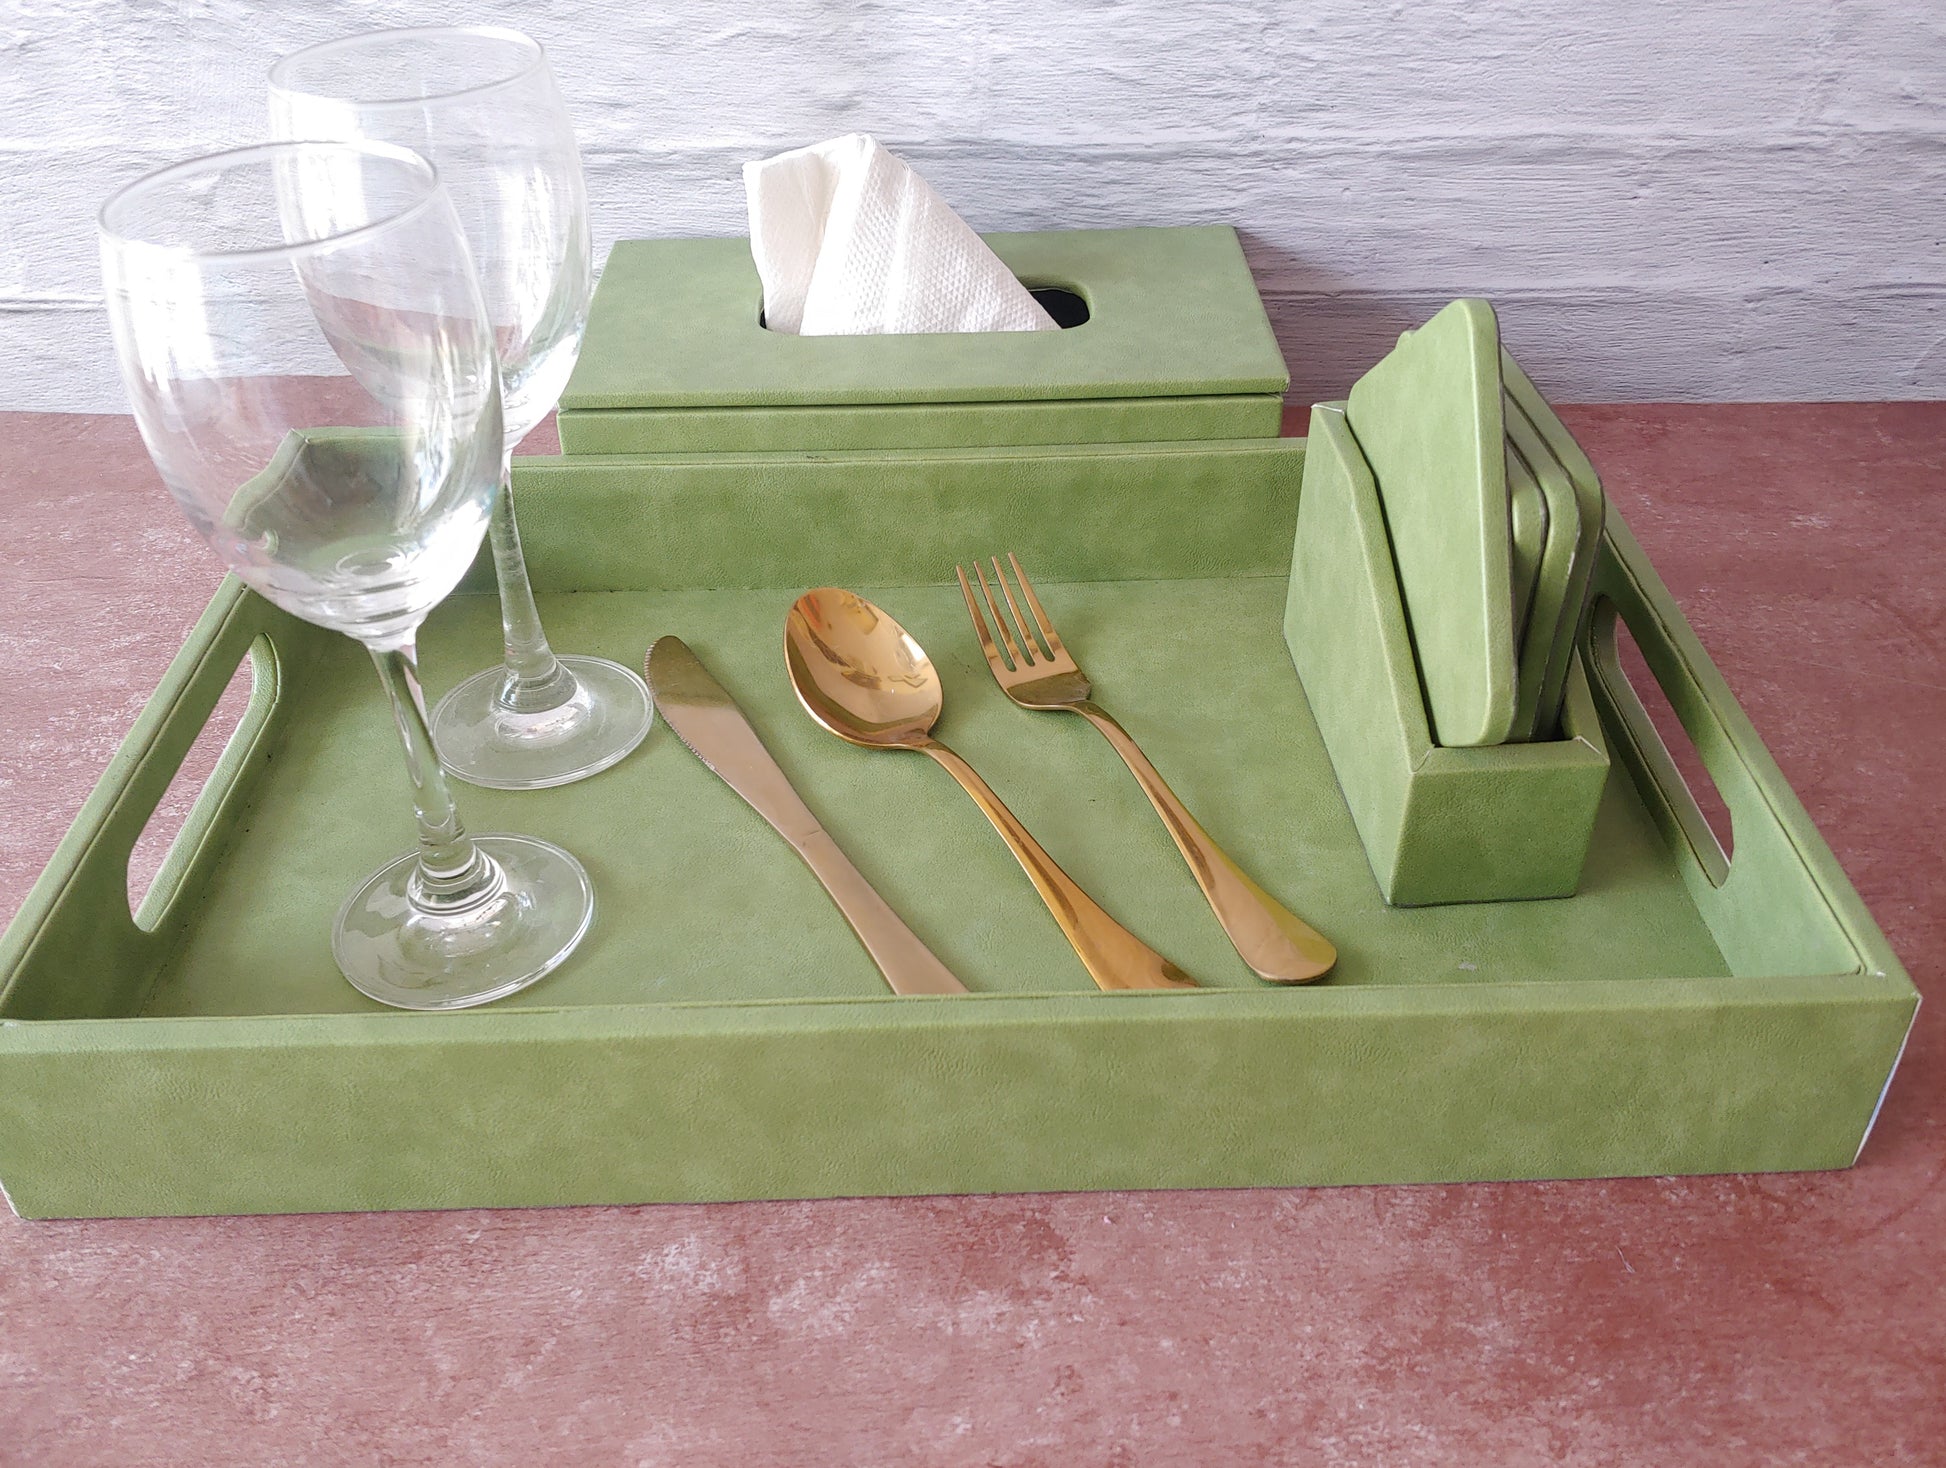 Pistachio Green Premium Leather Serving Tray along with tissue holder and coasters